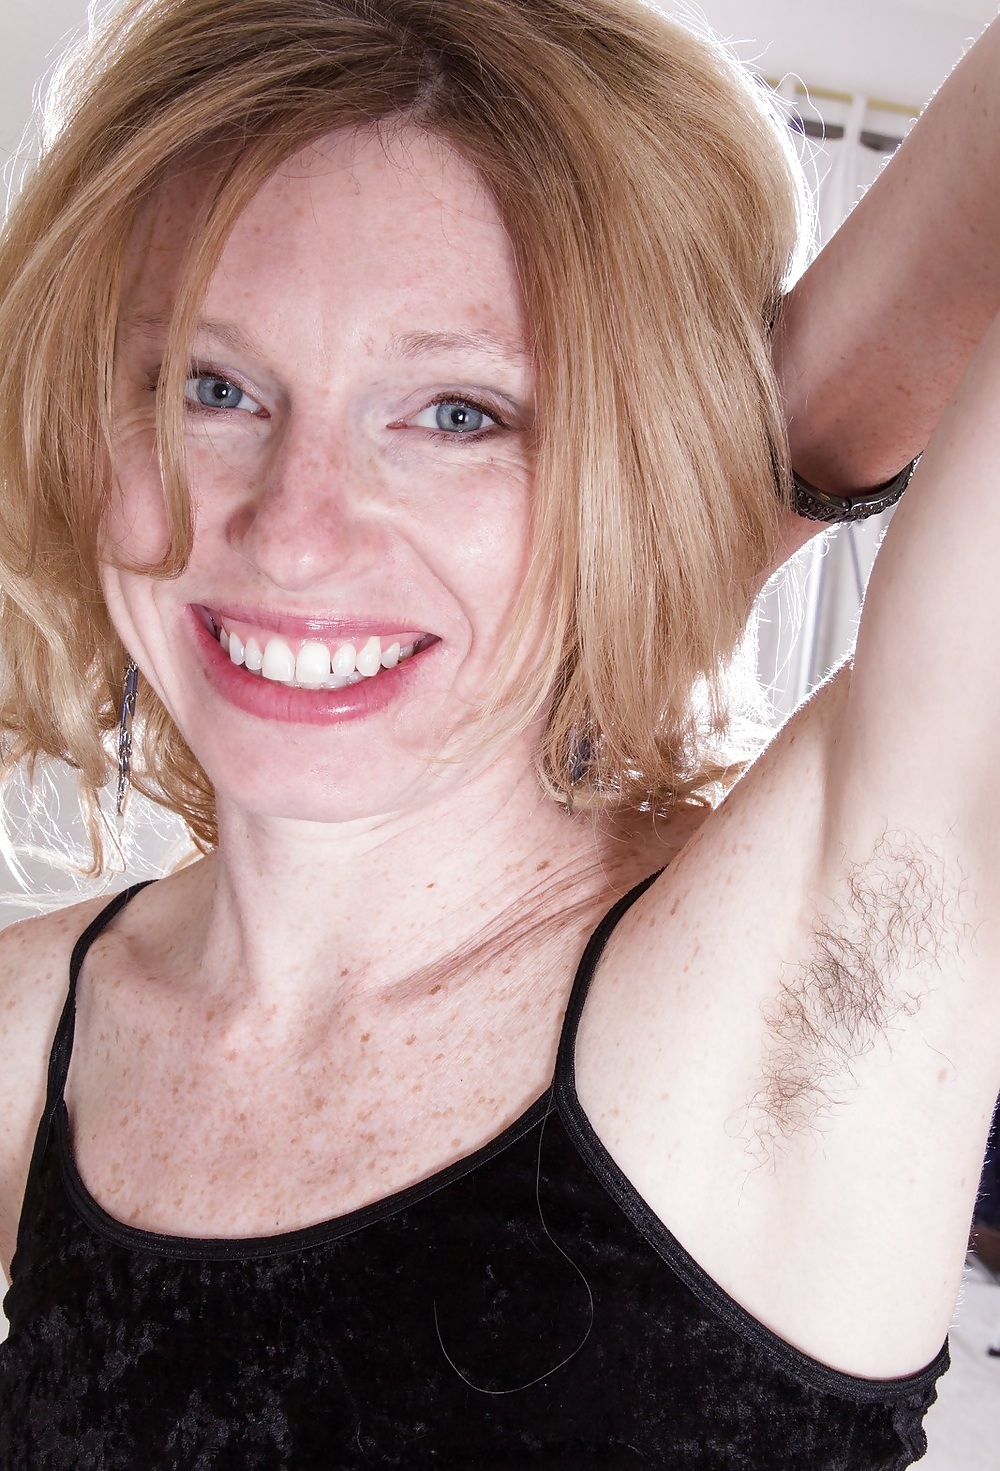 Miscellaneous girls showing hairy, unshaven armpits 3 #36174465